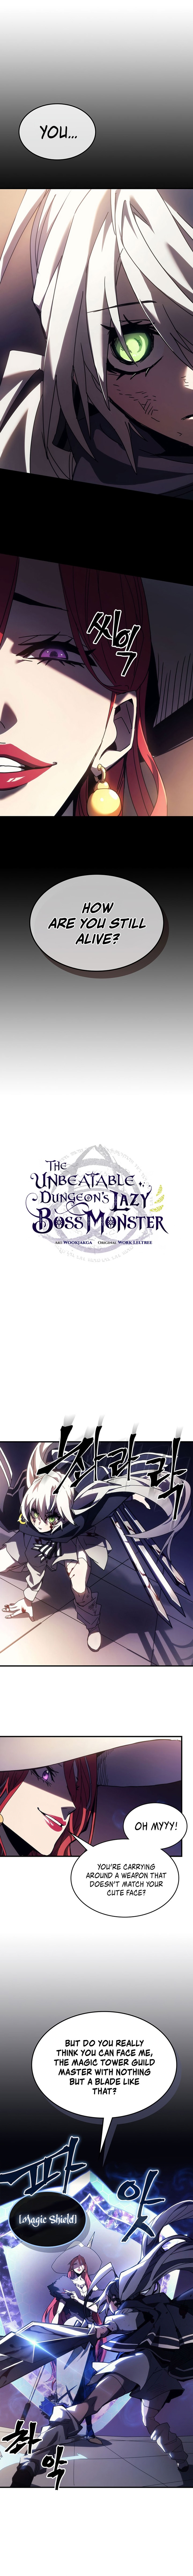 the_unbeatable_dungeons_lazy_boss_monster_18_1